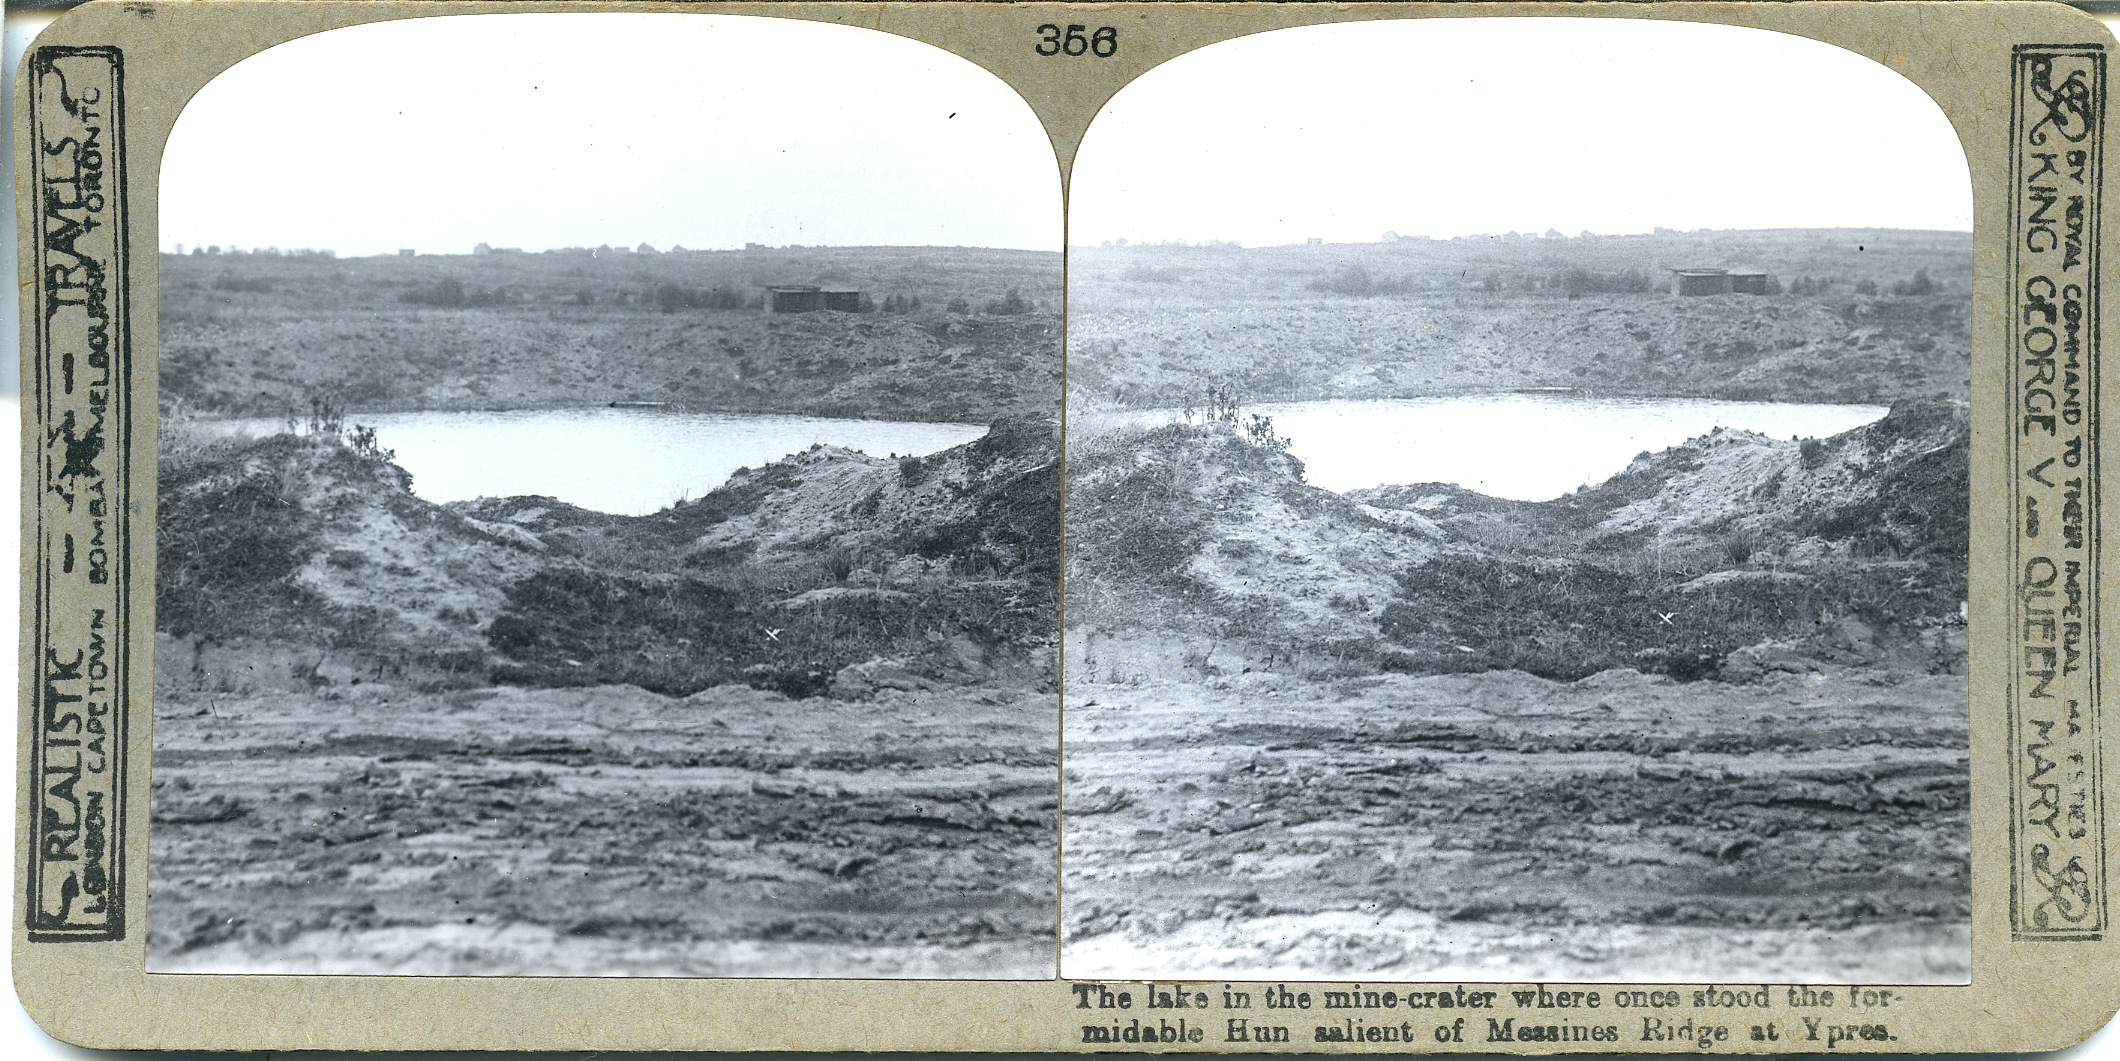 The lake in the mine-crater where once stood the formidable Hun salient of Messines Ridge at Ypres